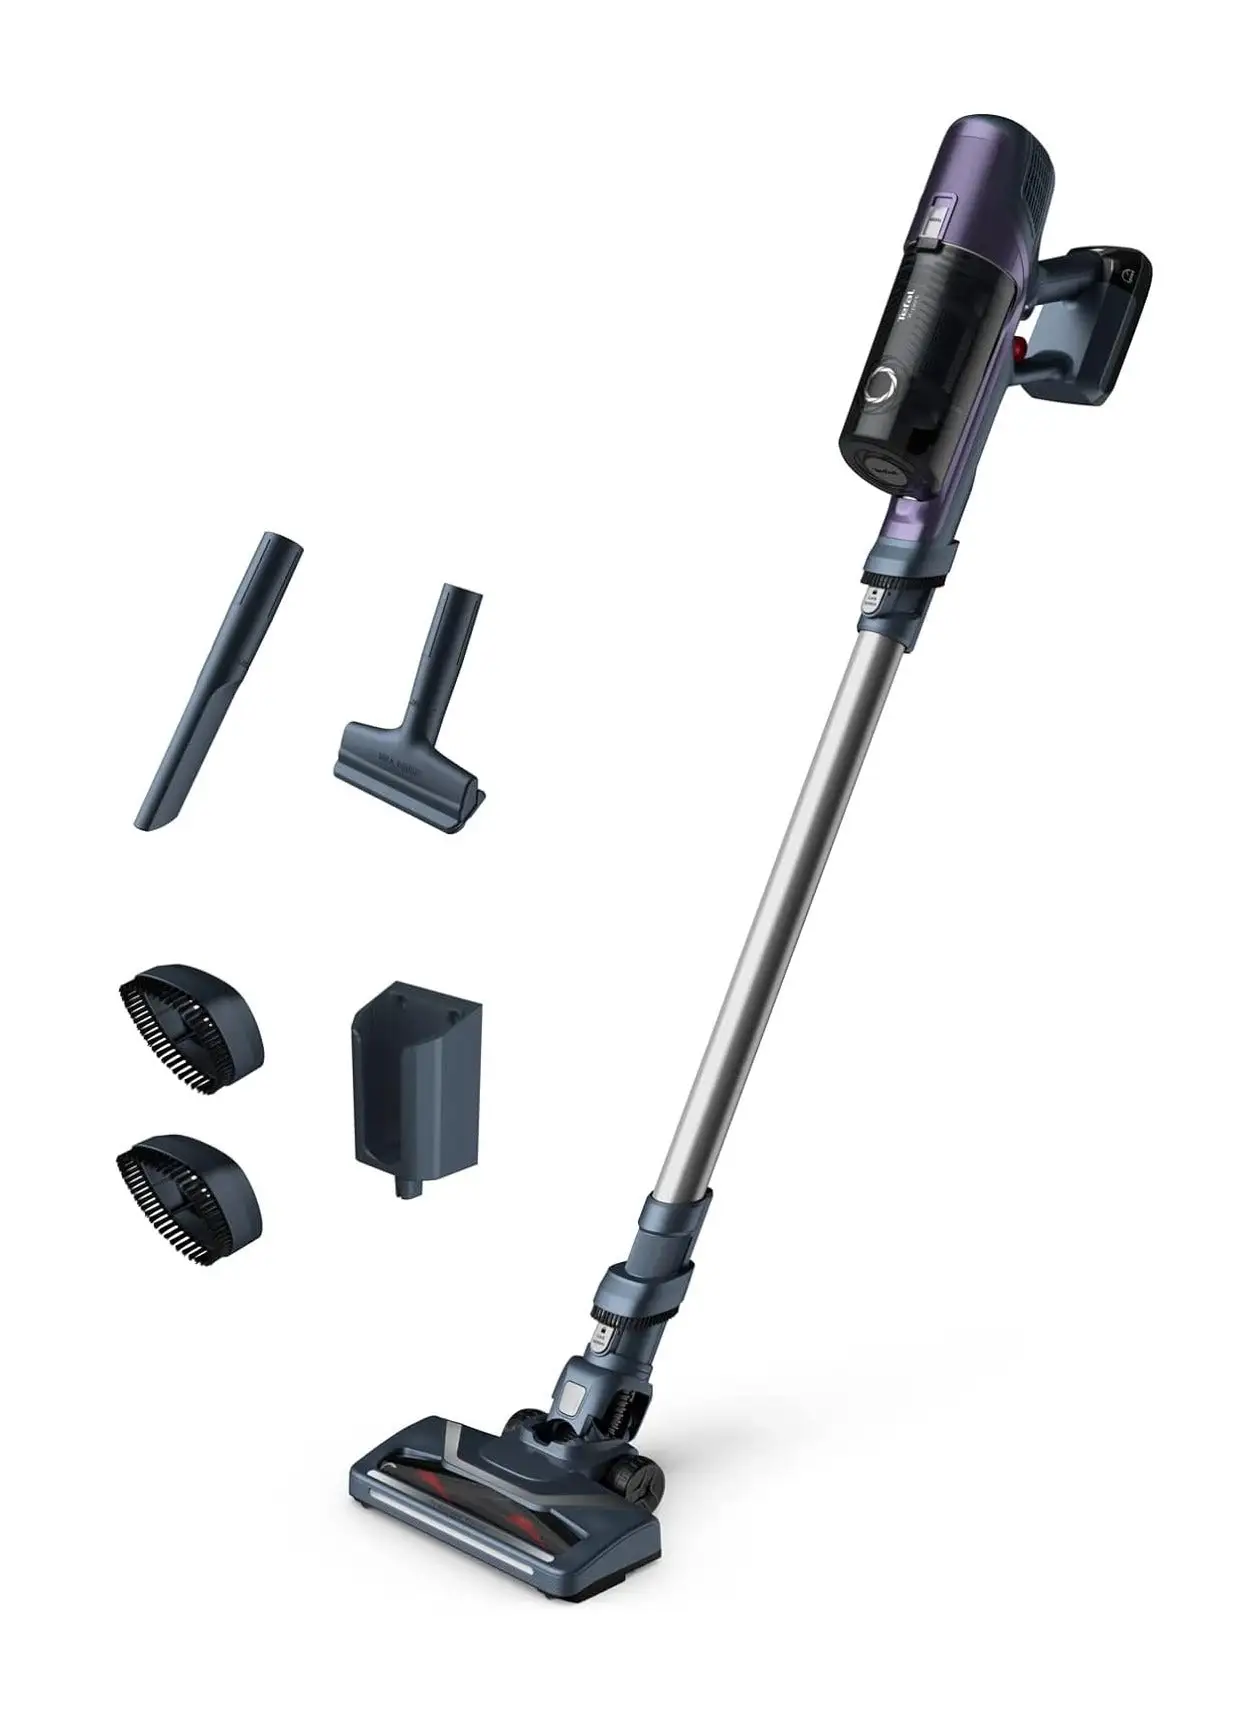 Tefal Cordless Stick Vacuum Cleaner 0.55L Dust Container Allergy Kit 100 W TY6837HO Purple/Grey